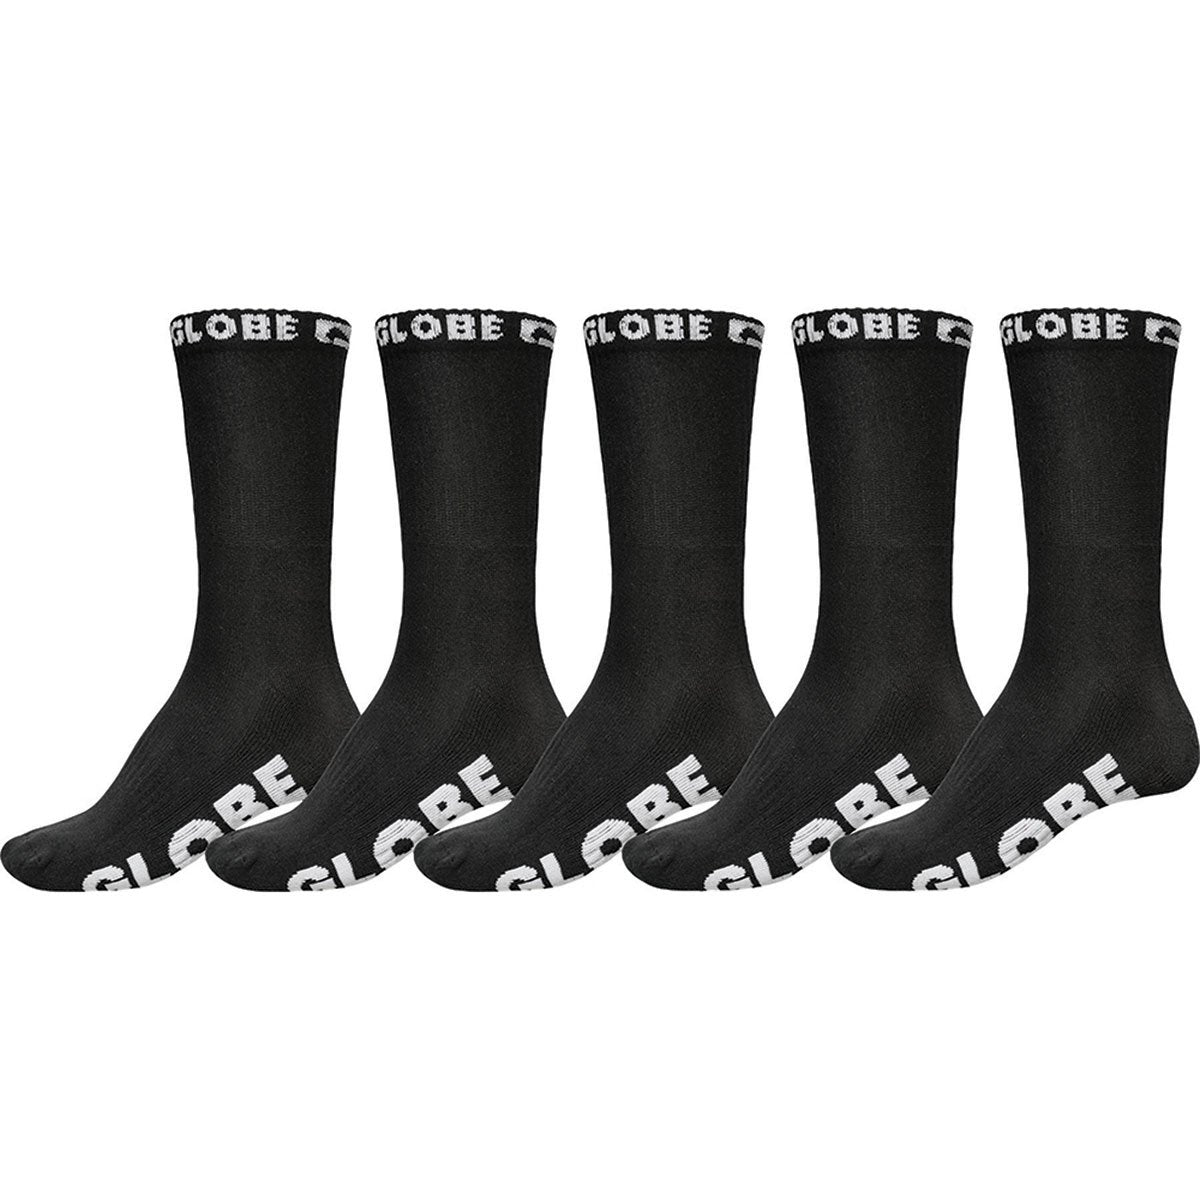 Globe Shoes - Black Out Crew Sock 5 Pack